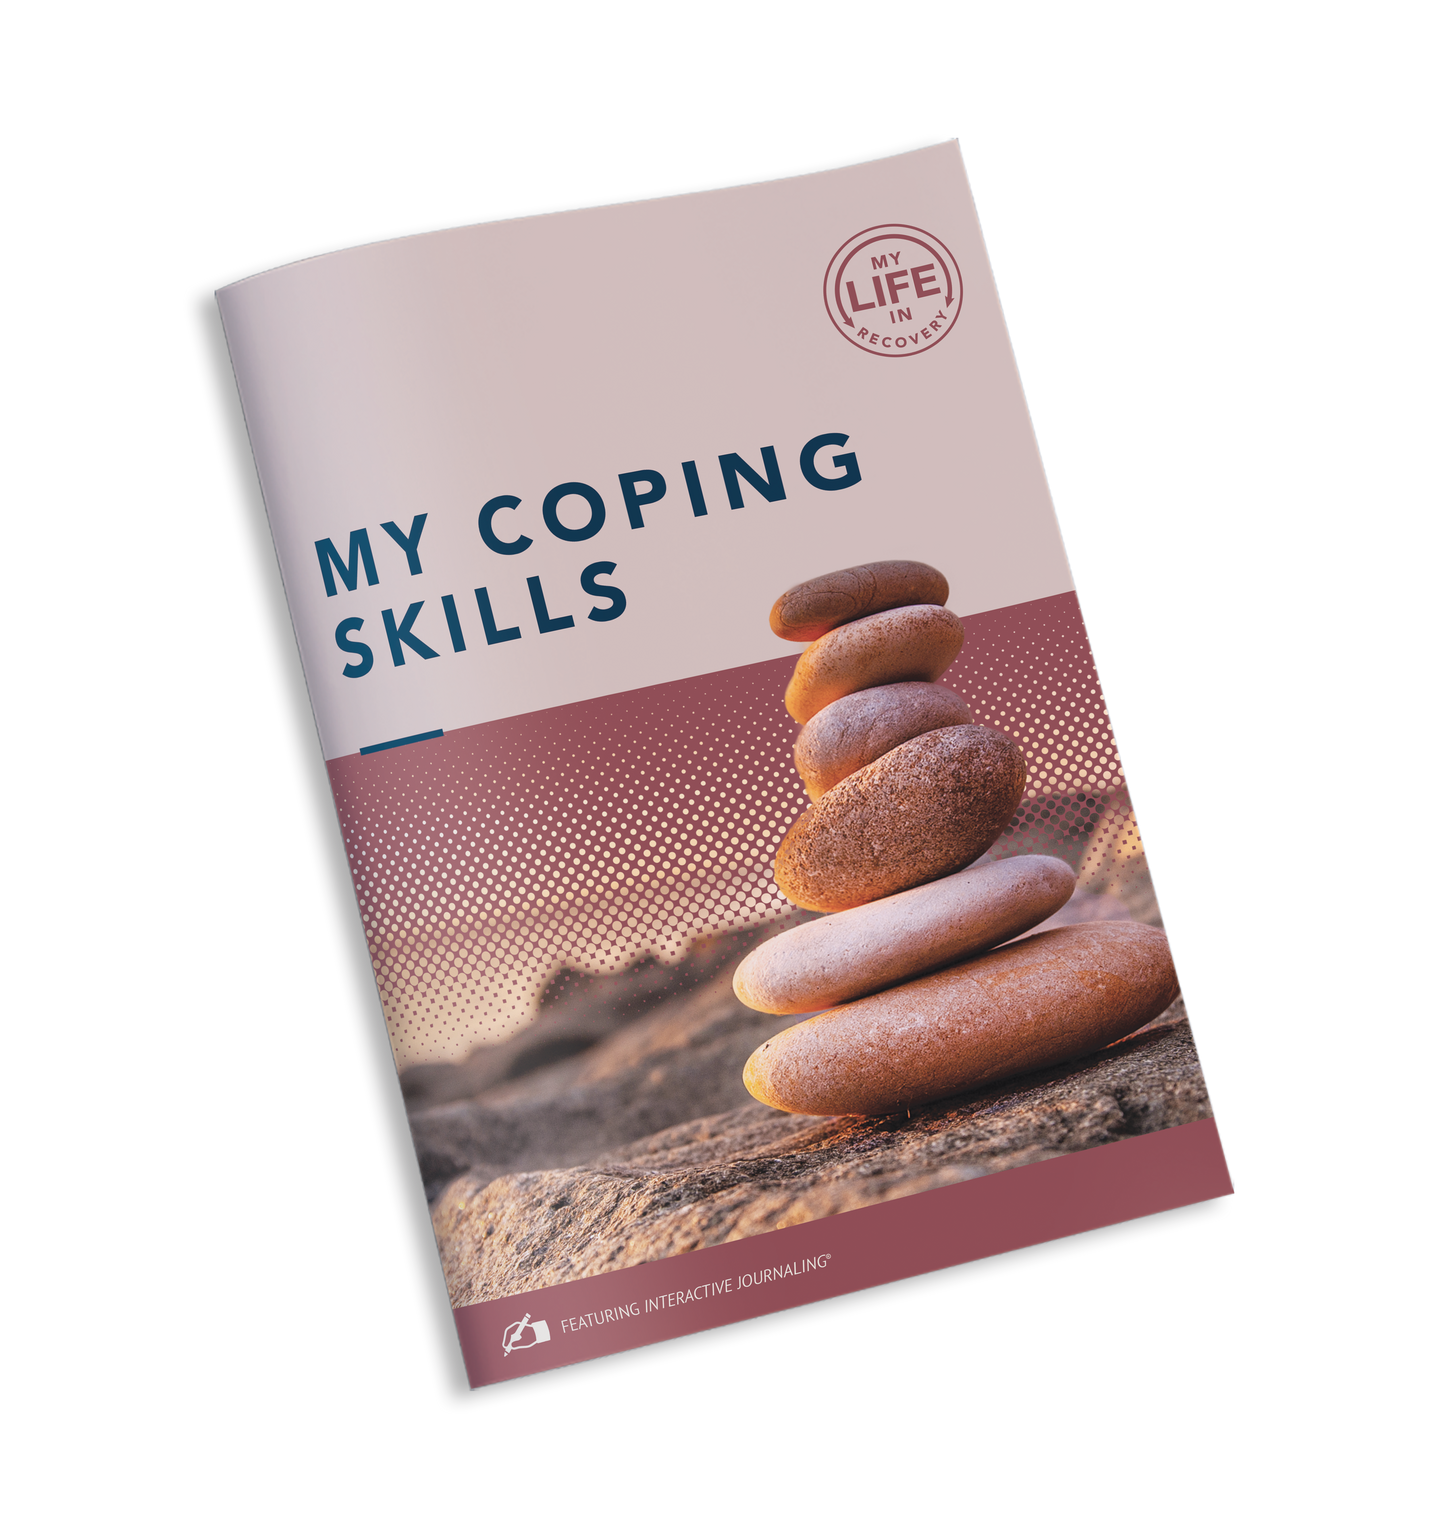 My Life in Recovery - My Coping Skills